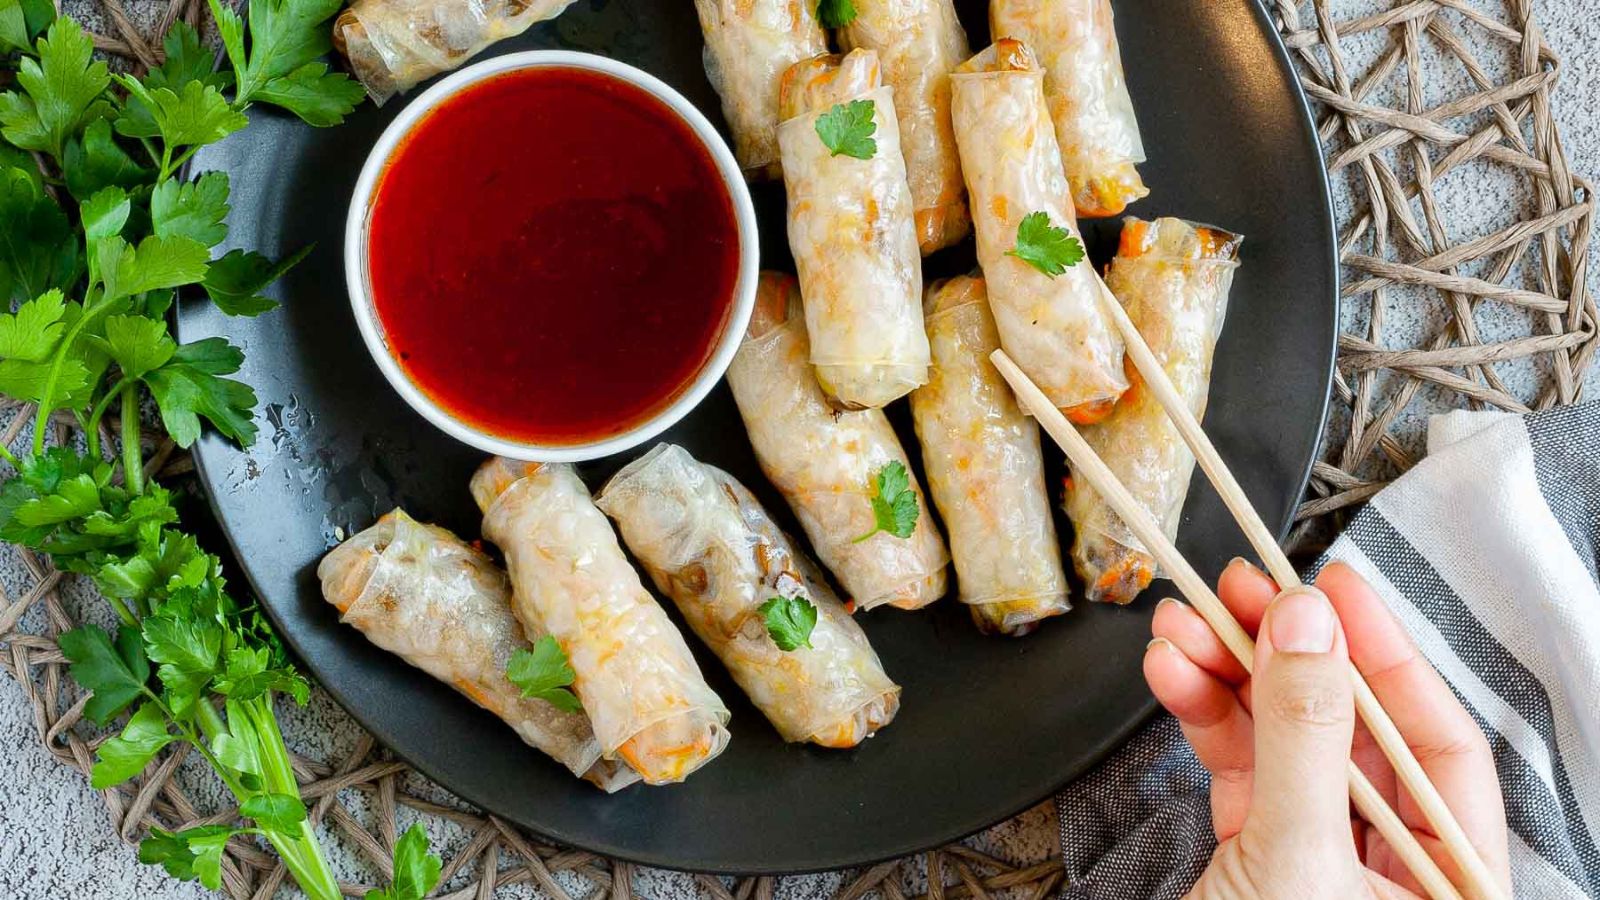 Healthy and Delicious: 19 Rice Paper Recipes to Try Now!